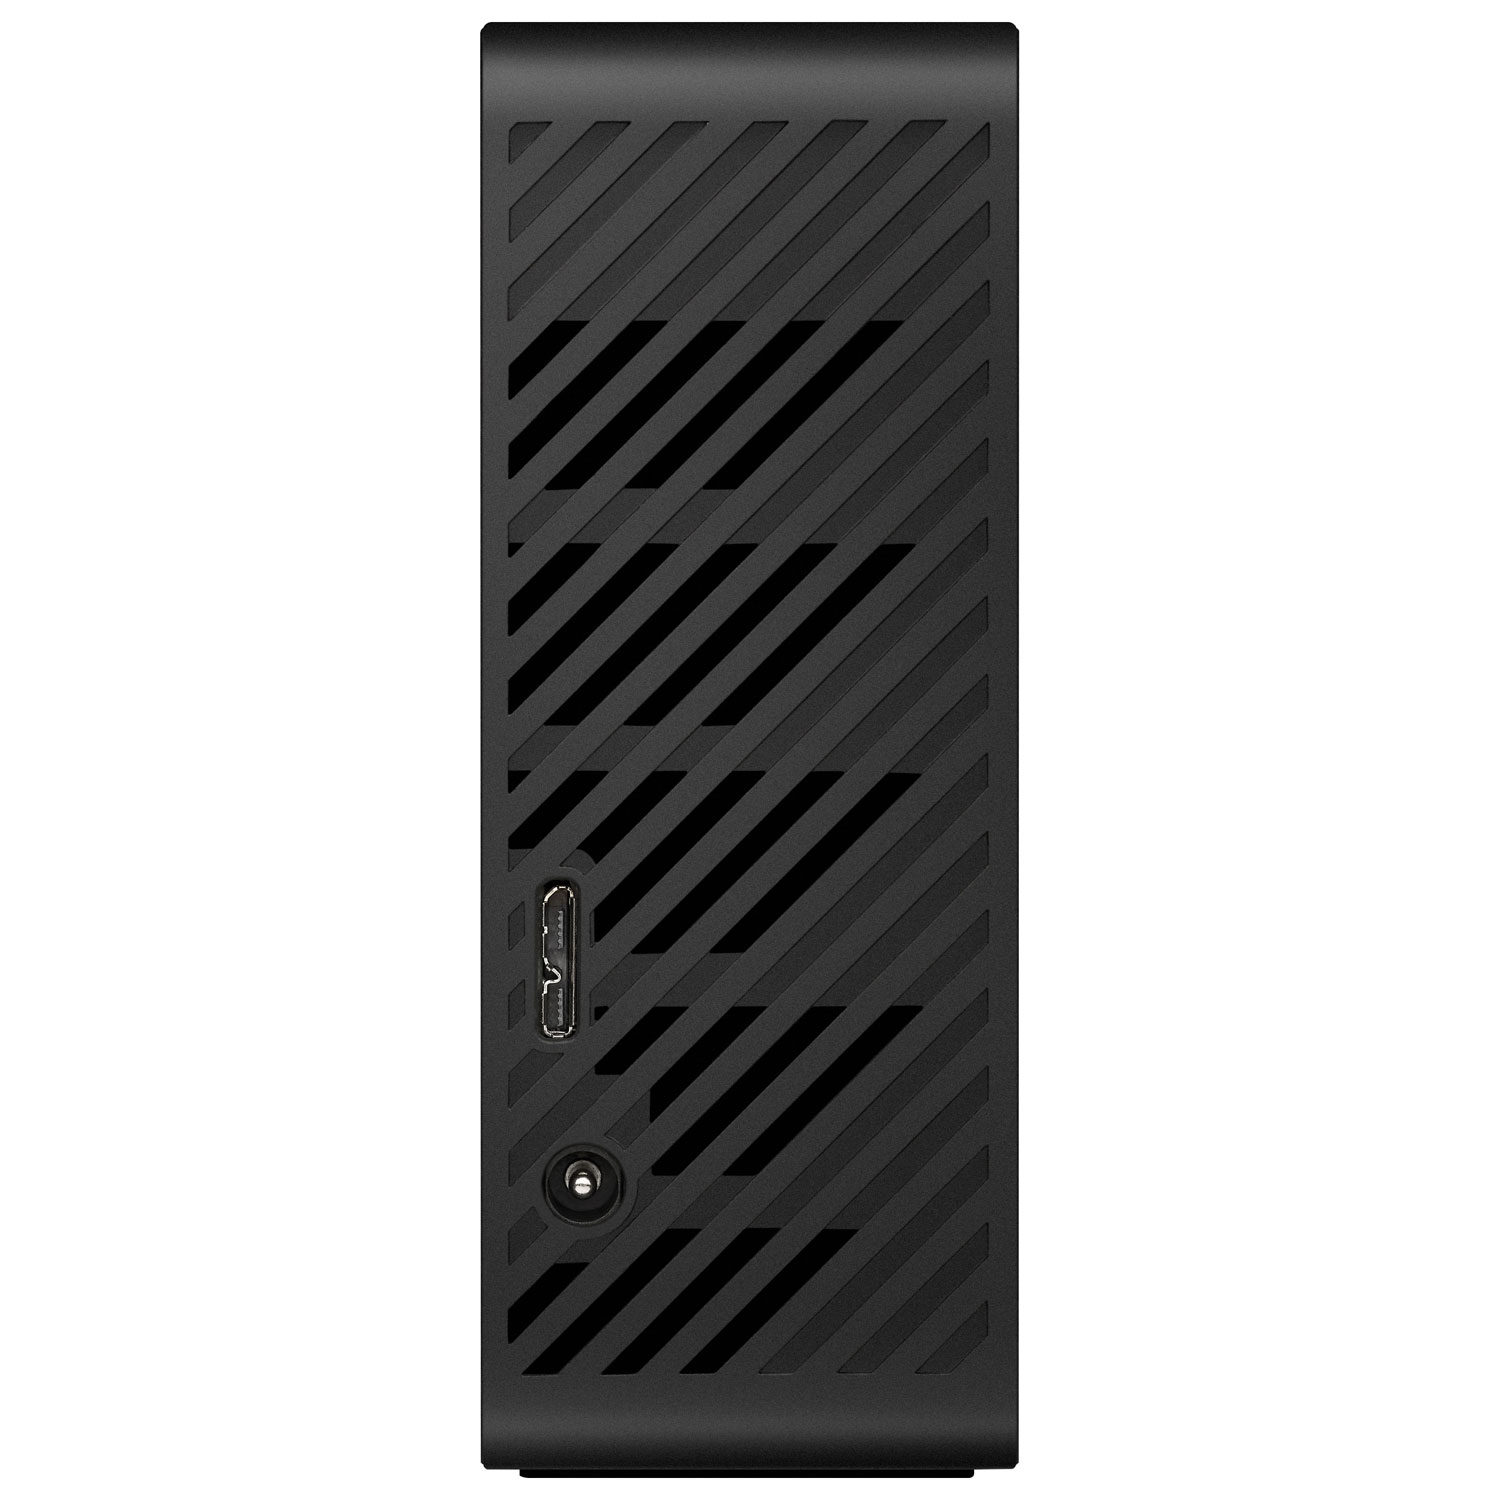 Seagate Expansion Disque dur externe 16 To USB 3.0 avec Rescue Data  Recovery Services (STKP16000400)